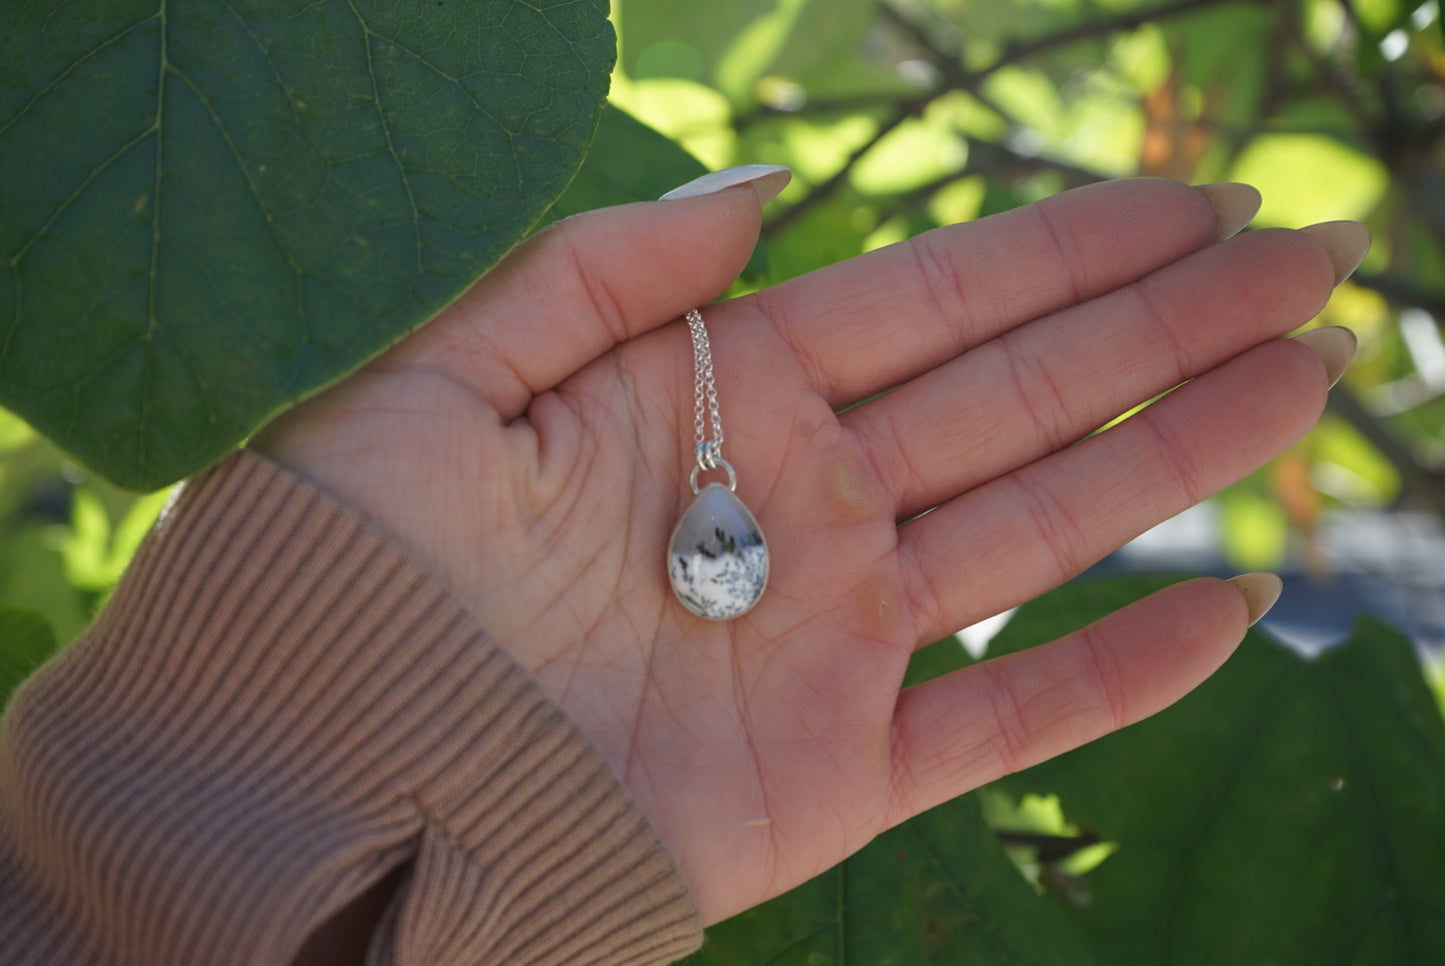 Dendritic Agate Necklace